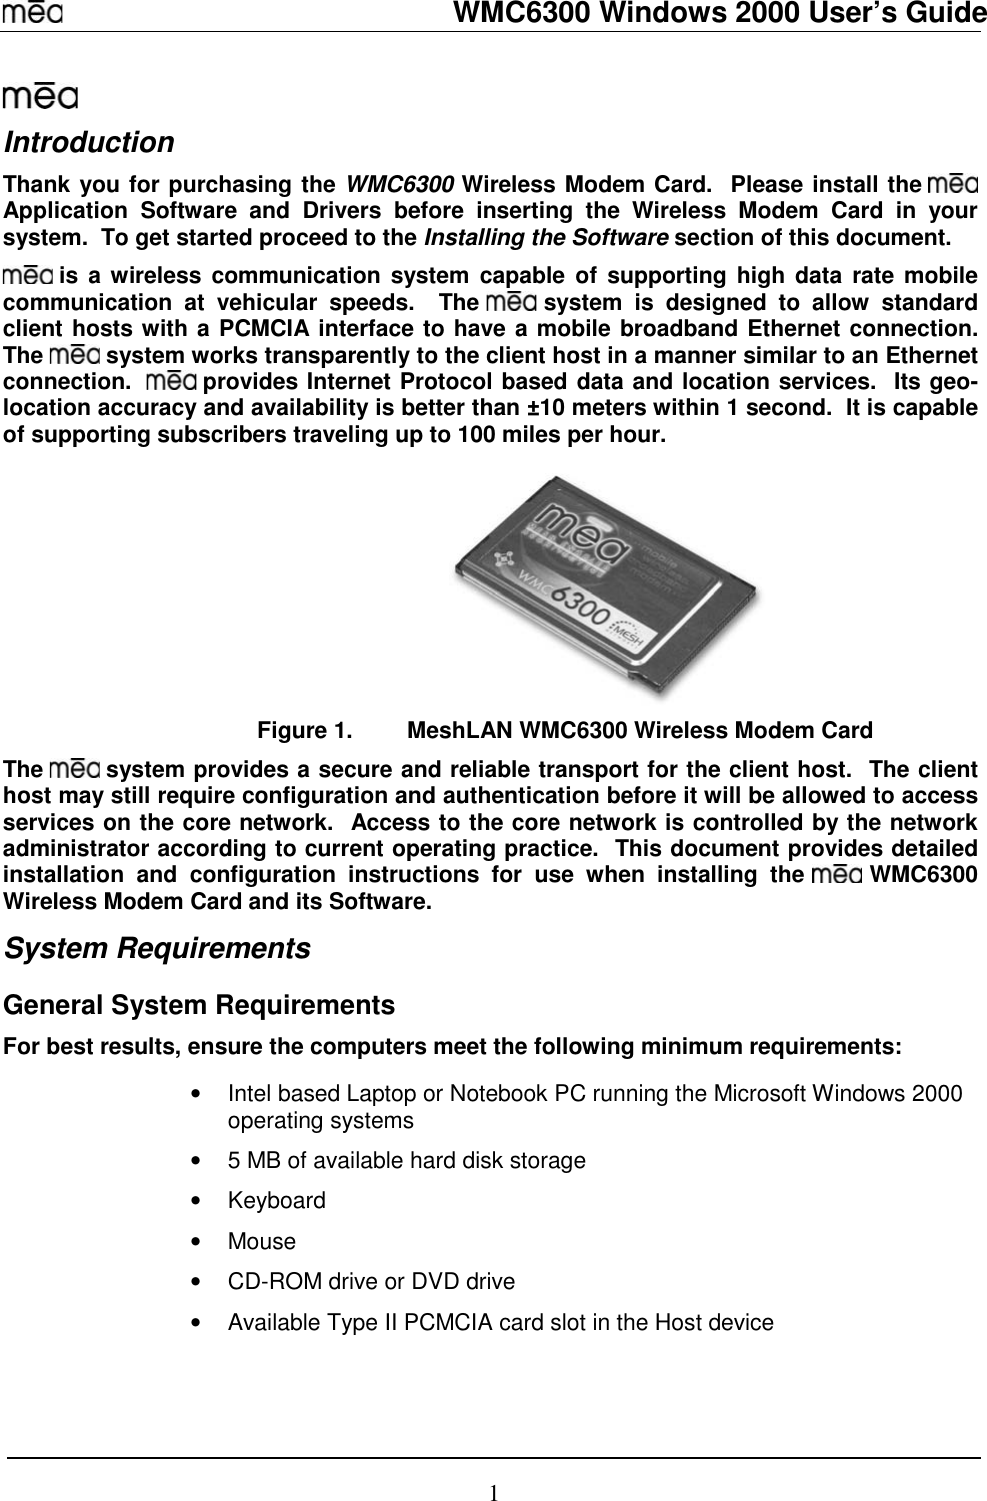   WMC6300 Windows 2000 User’s Guide 1  Introduction Thank you for purchasing the WMC6300 Wireless Modem Card.  Please install the   Application Software and Drivers before inserting the Wireless Modem Card in your system.  To get started proceed to the Installing the Software section of this document.  is a wireless communication system capable of supporting high data rate mobile communication at vehicular speeds.  The   system is designed to allow standard client hosts with a PCMCIA interface to have a mobile broadband Ethernet connection.  The   system works transparently to the client host in a manner similar to an Ethernet connection.    provides Internet Protocol based data and location services.  Its geo-location accuracy and availability is better than ±10 meters within 1 second.  It is capable of supporting subscribers traveling up to 100 miles per hour.  Figure 1.  MeshLAN WMC6300 Wireless Modem Card The   system provides a secure and reliable transport for the client host.  The client host may still require configuration and authentication before it will be allowed to access services on the core network.  Access to the core network is controlled by the network administrator according to current operating practice.  This document provides detailed installation and configuration instructions for use when installing the   WMC6300 Wireless Modem Card and its Software.  System Requirements General System Requirements For best results, ensure the computers meet the following minimum requirements:  •  Intel based Laptop or Notebook PC running the Microsoft Windows 2000 operating systems •  5 MB of available hard disk storage • Keyboard • Mouse •  CD-ROM drive or DVD drive •  Available Type II PCMCIA card slot in the Host device 